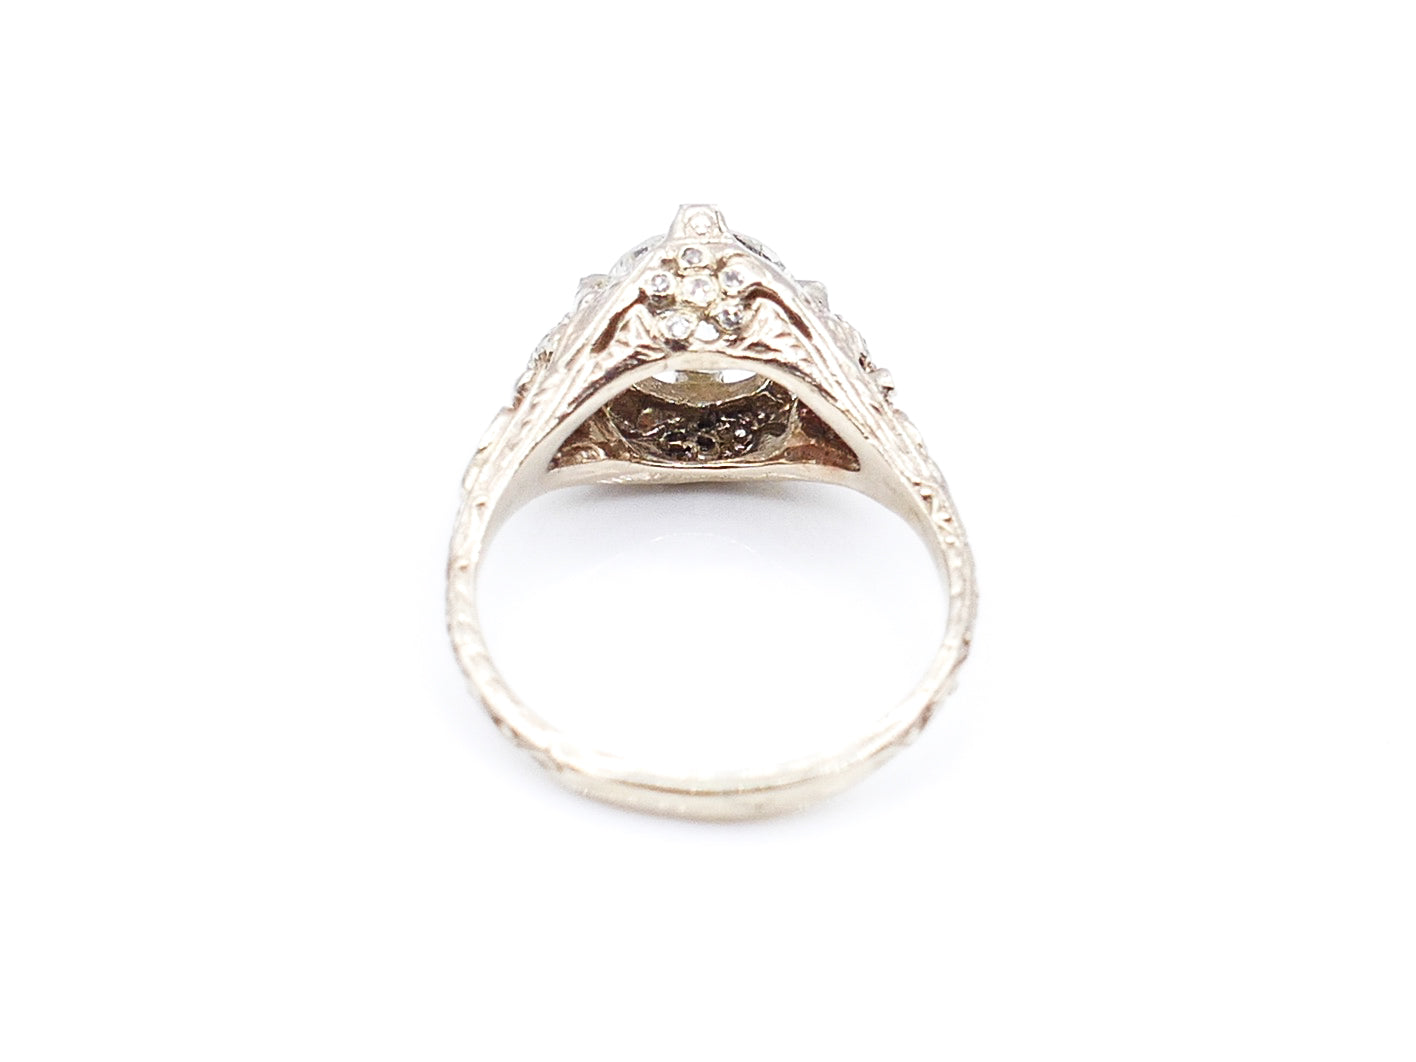 Antique-Style 1.25 Carat Diamond and White Gold Engagement Ring